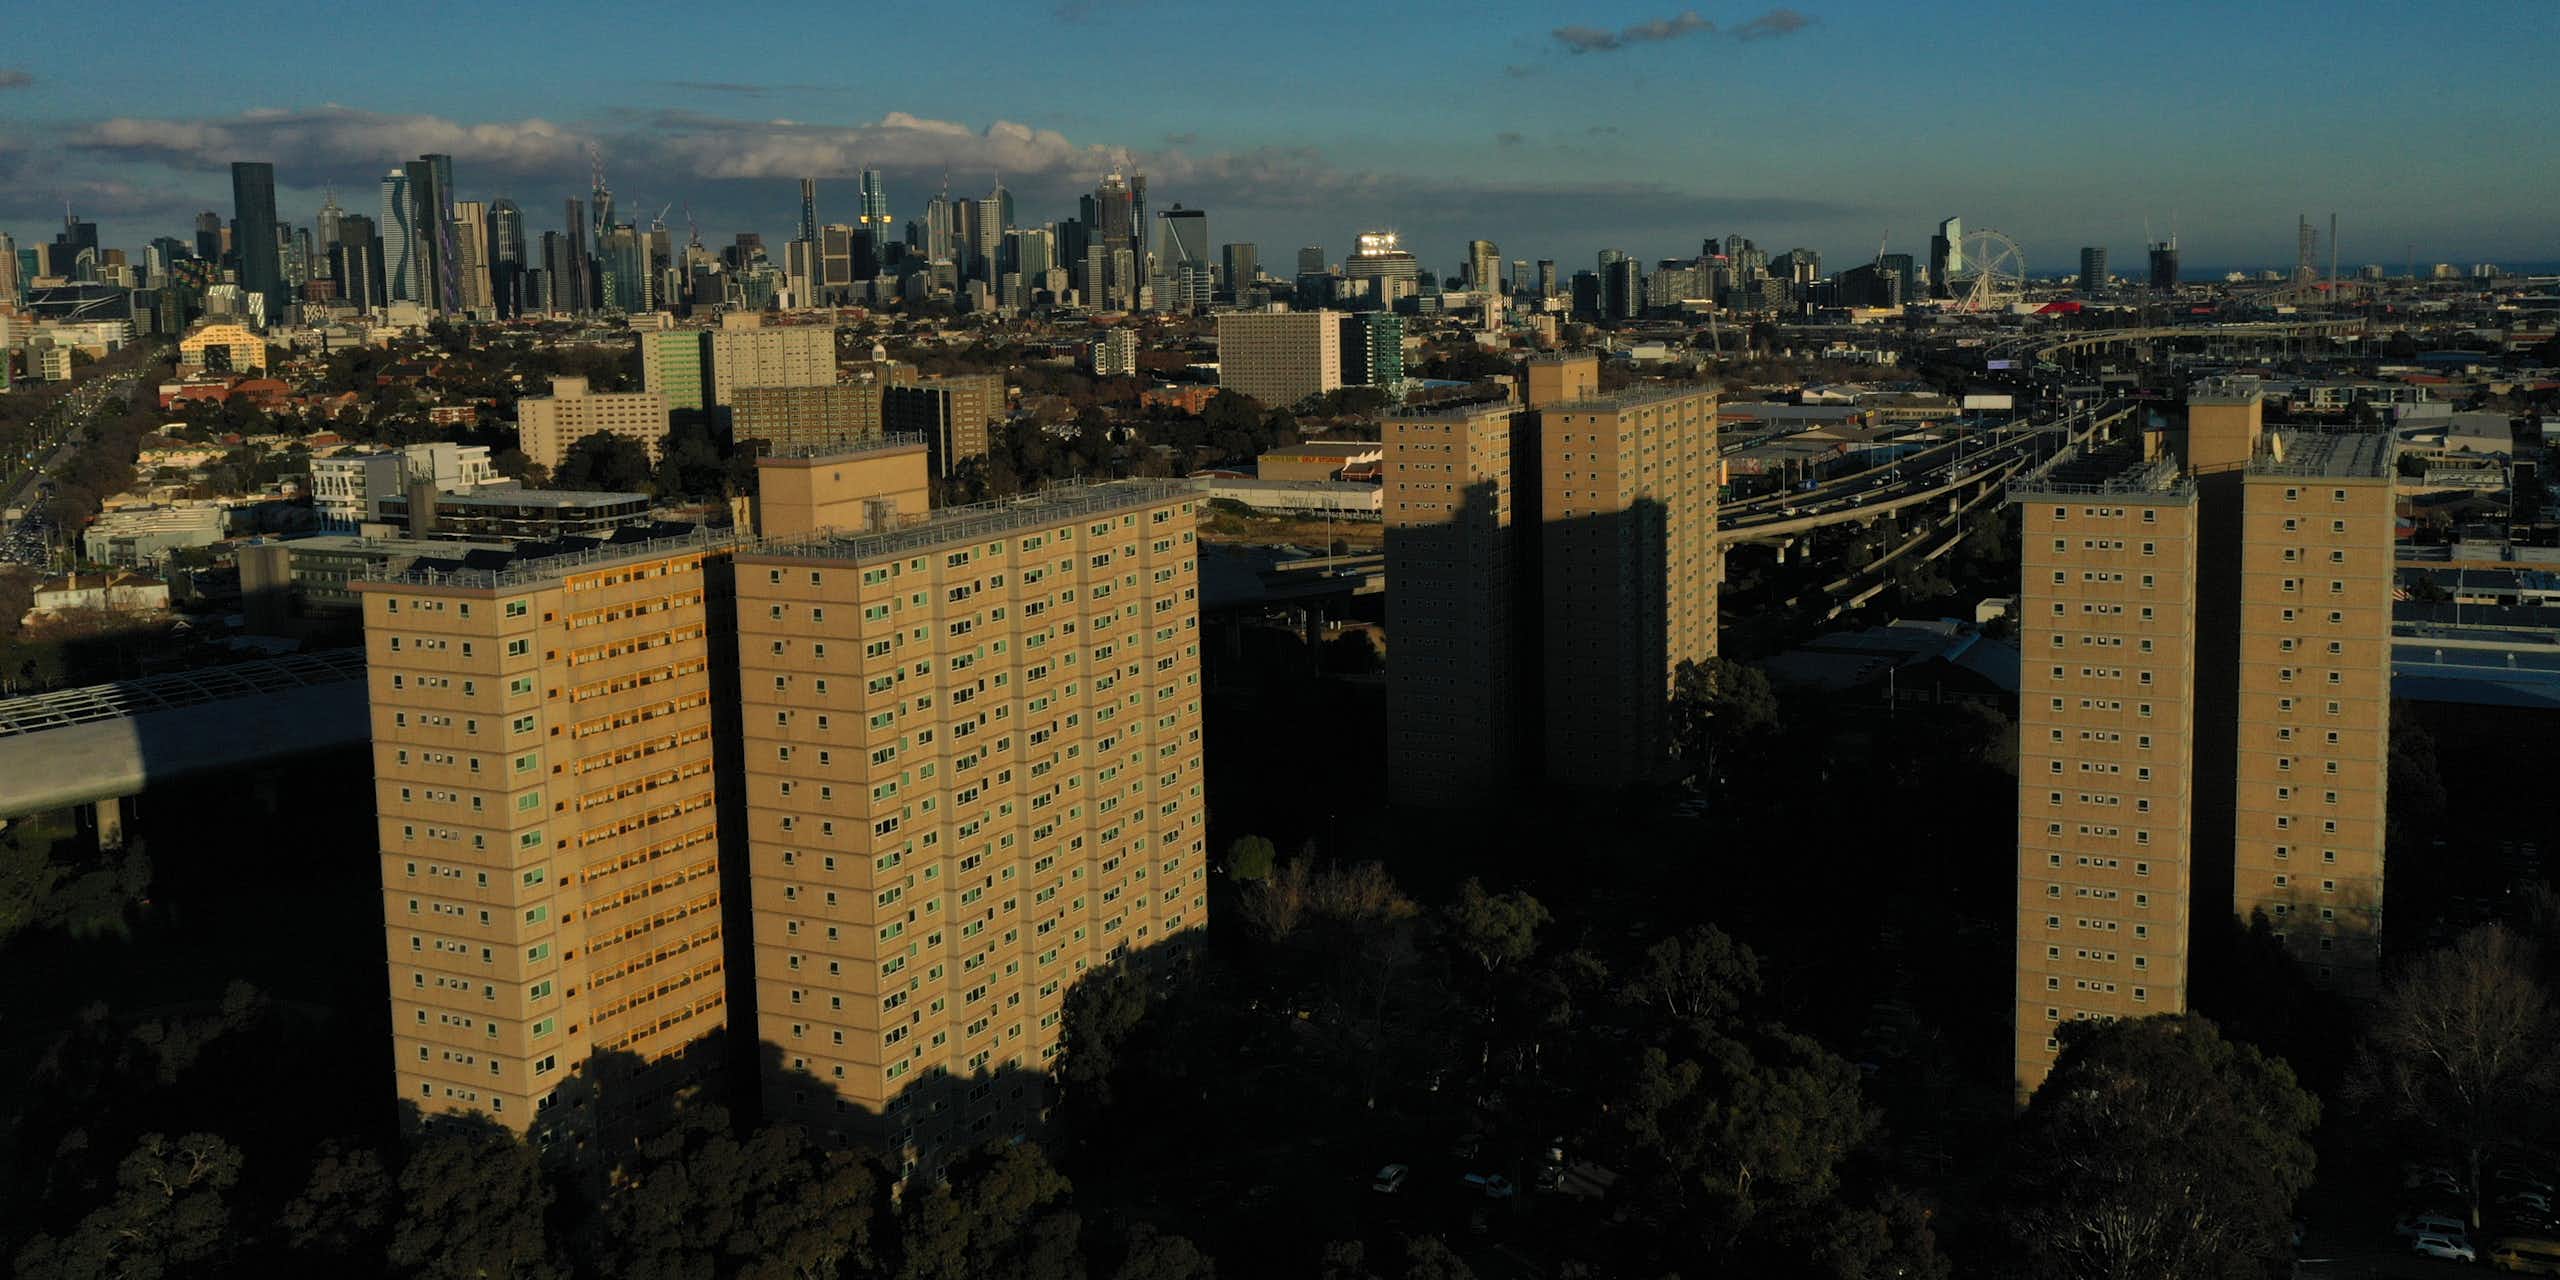 aerial view of public housing towers looking towards the Melbourne CBD